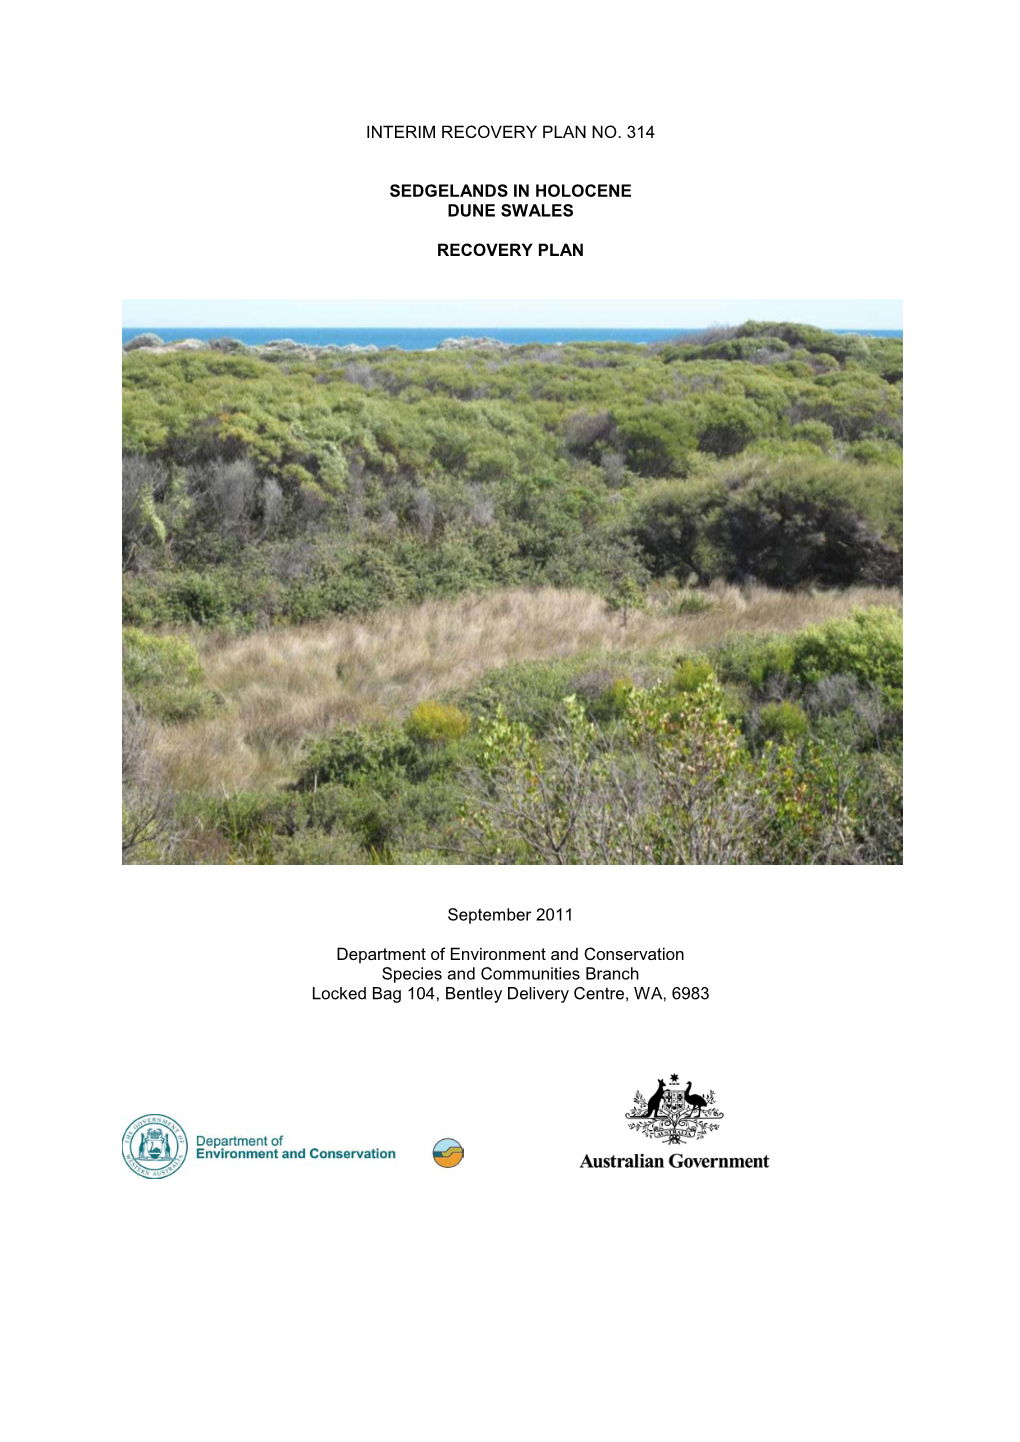 Sedgelands in Holocene Dune Swales Recovery Plan